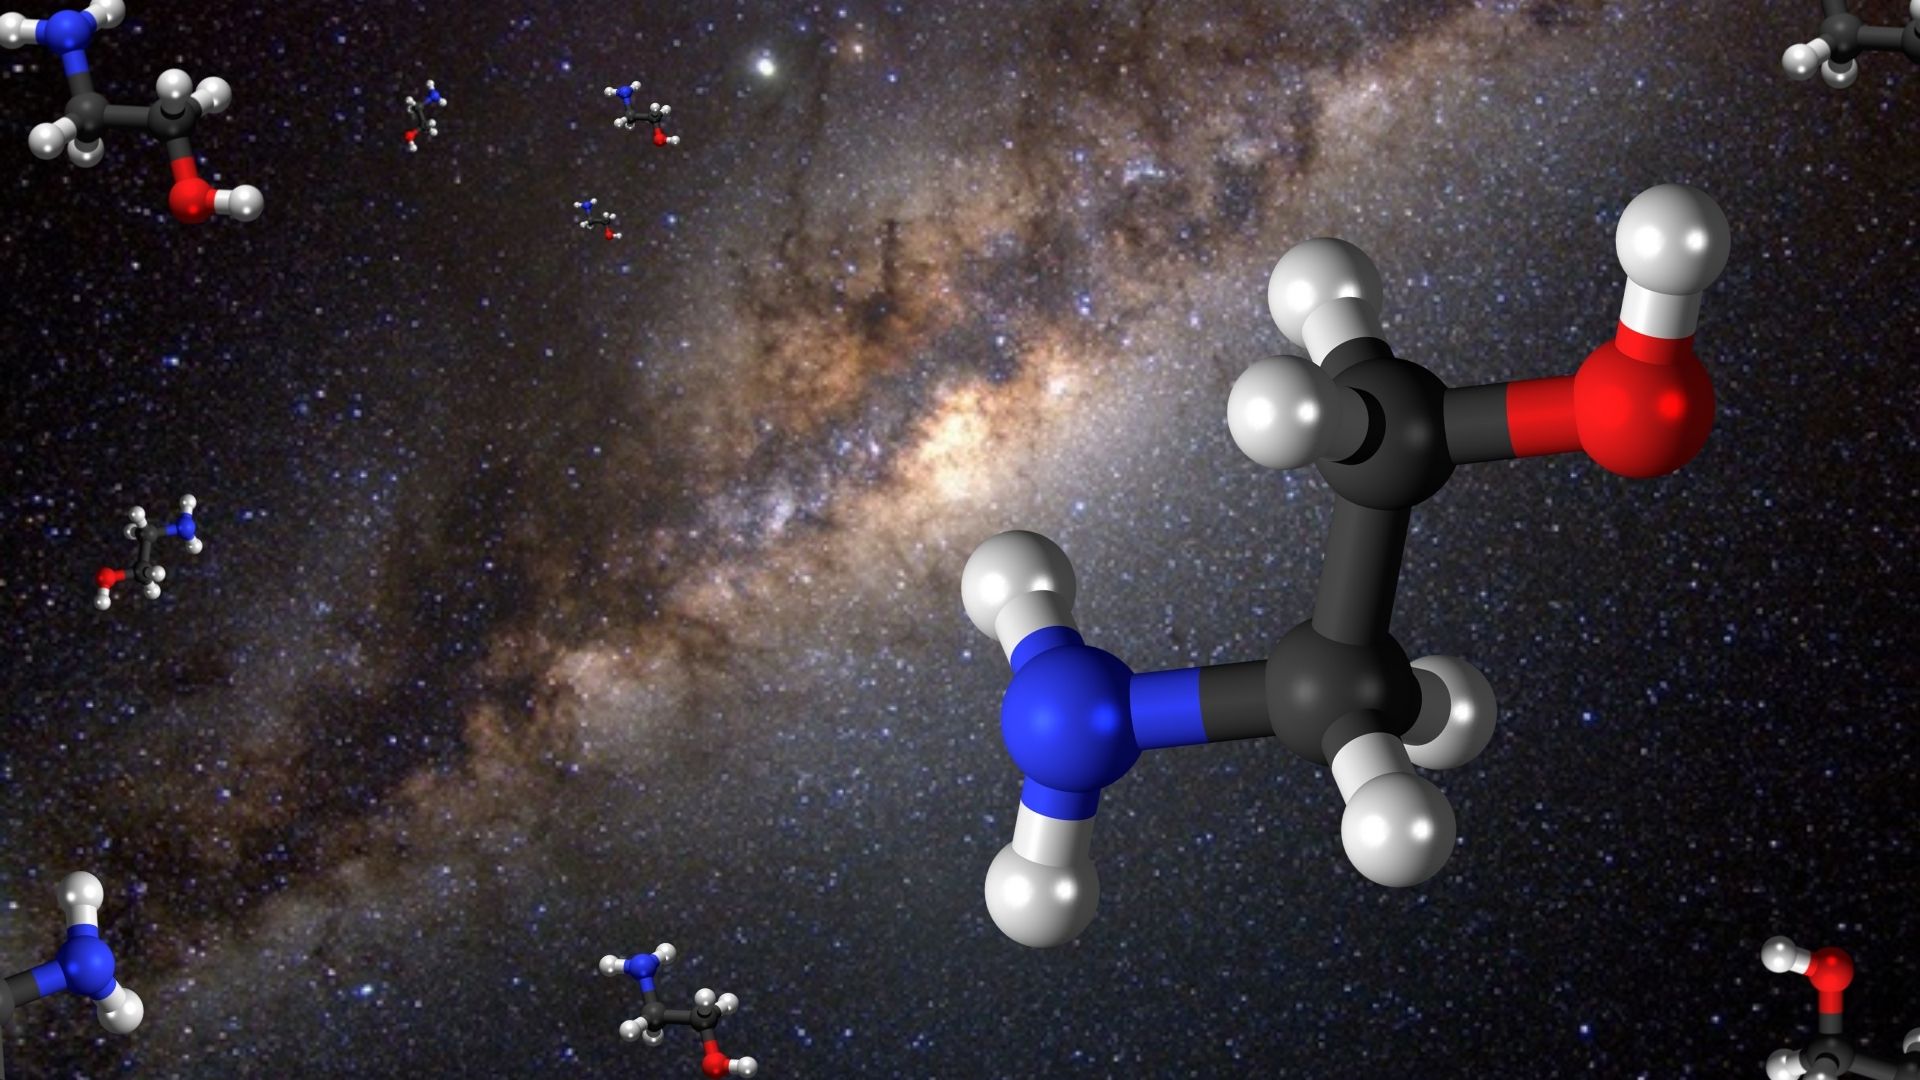 Basic Ingredient of Life Discovered in Space